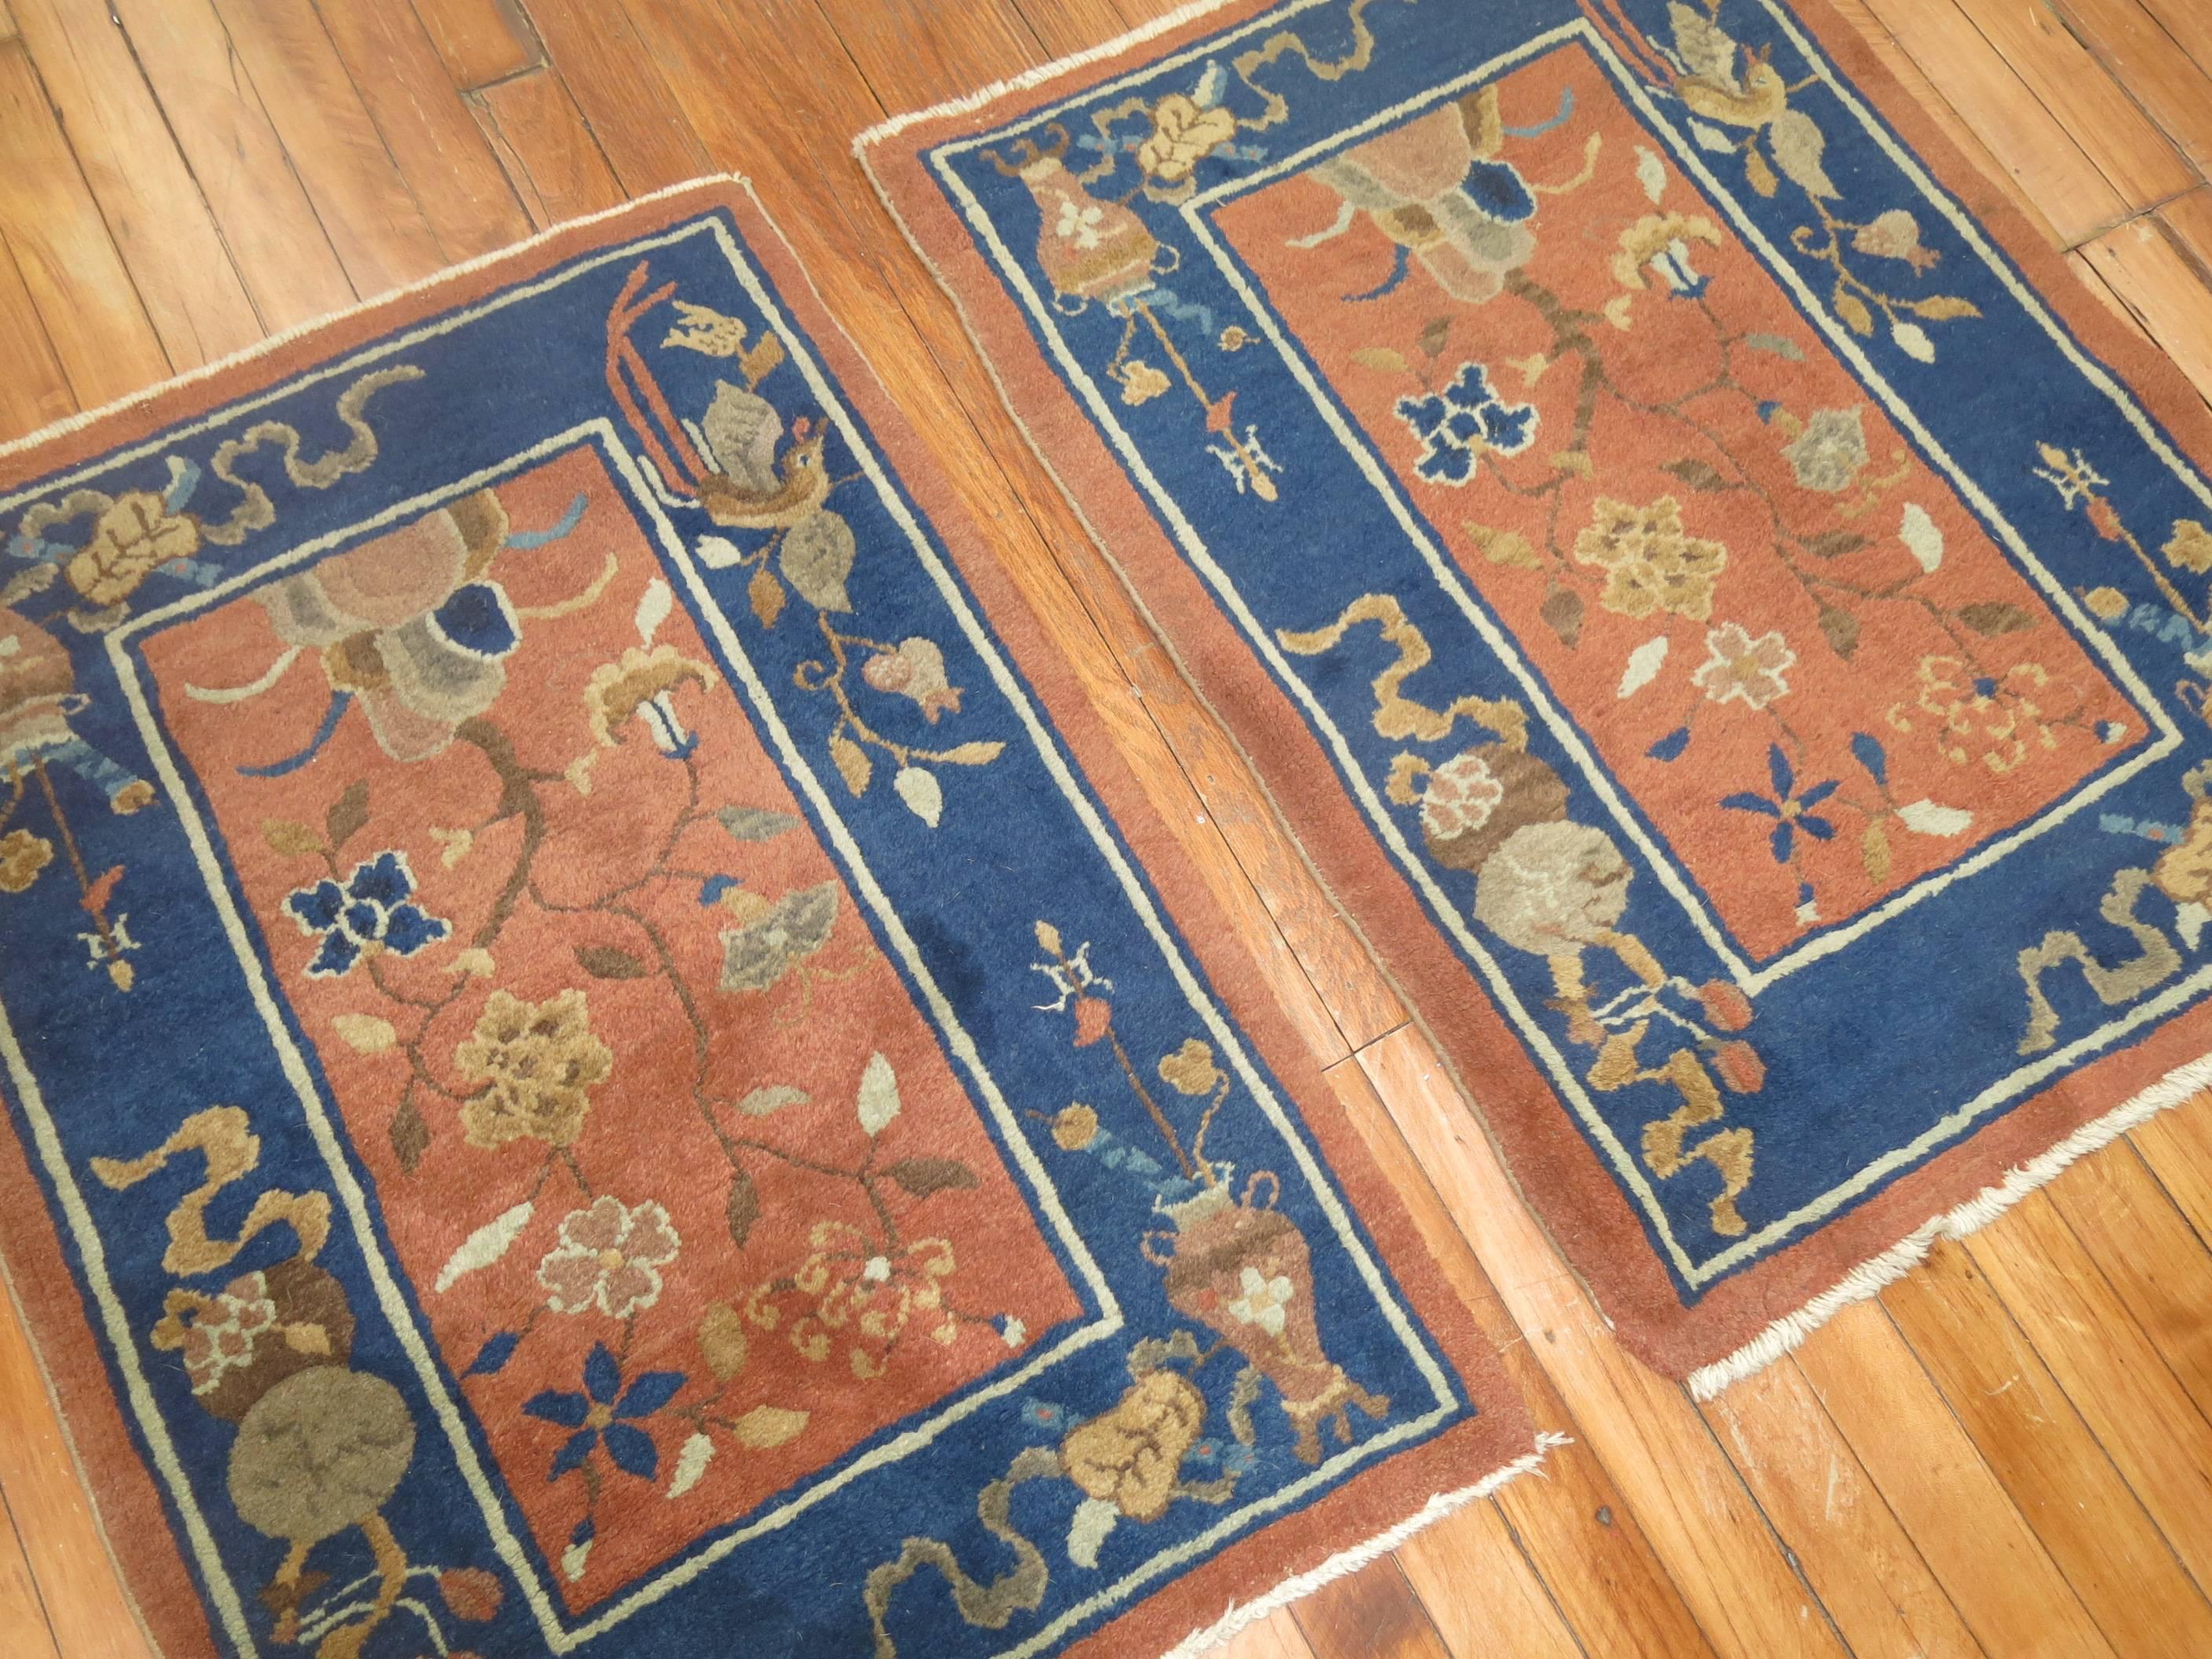 Hand-Woven Matching Set of Chinese Art Deco Rugs